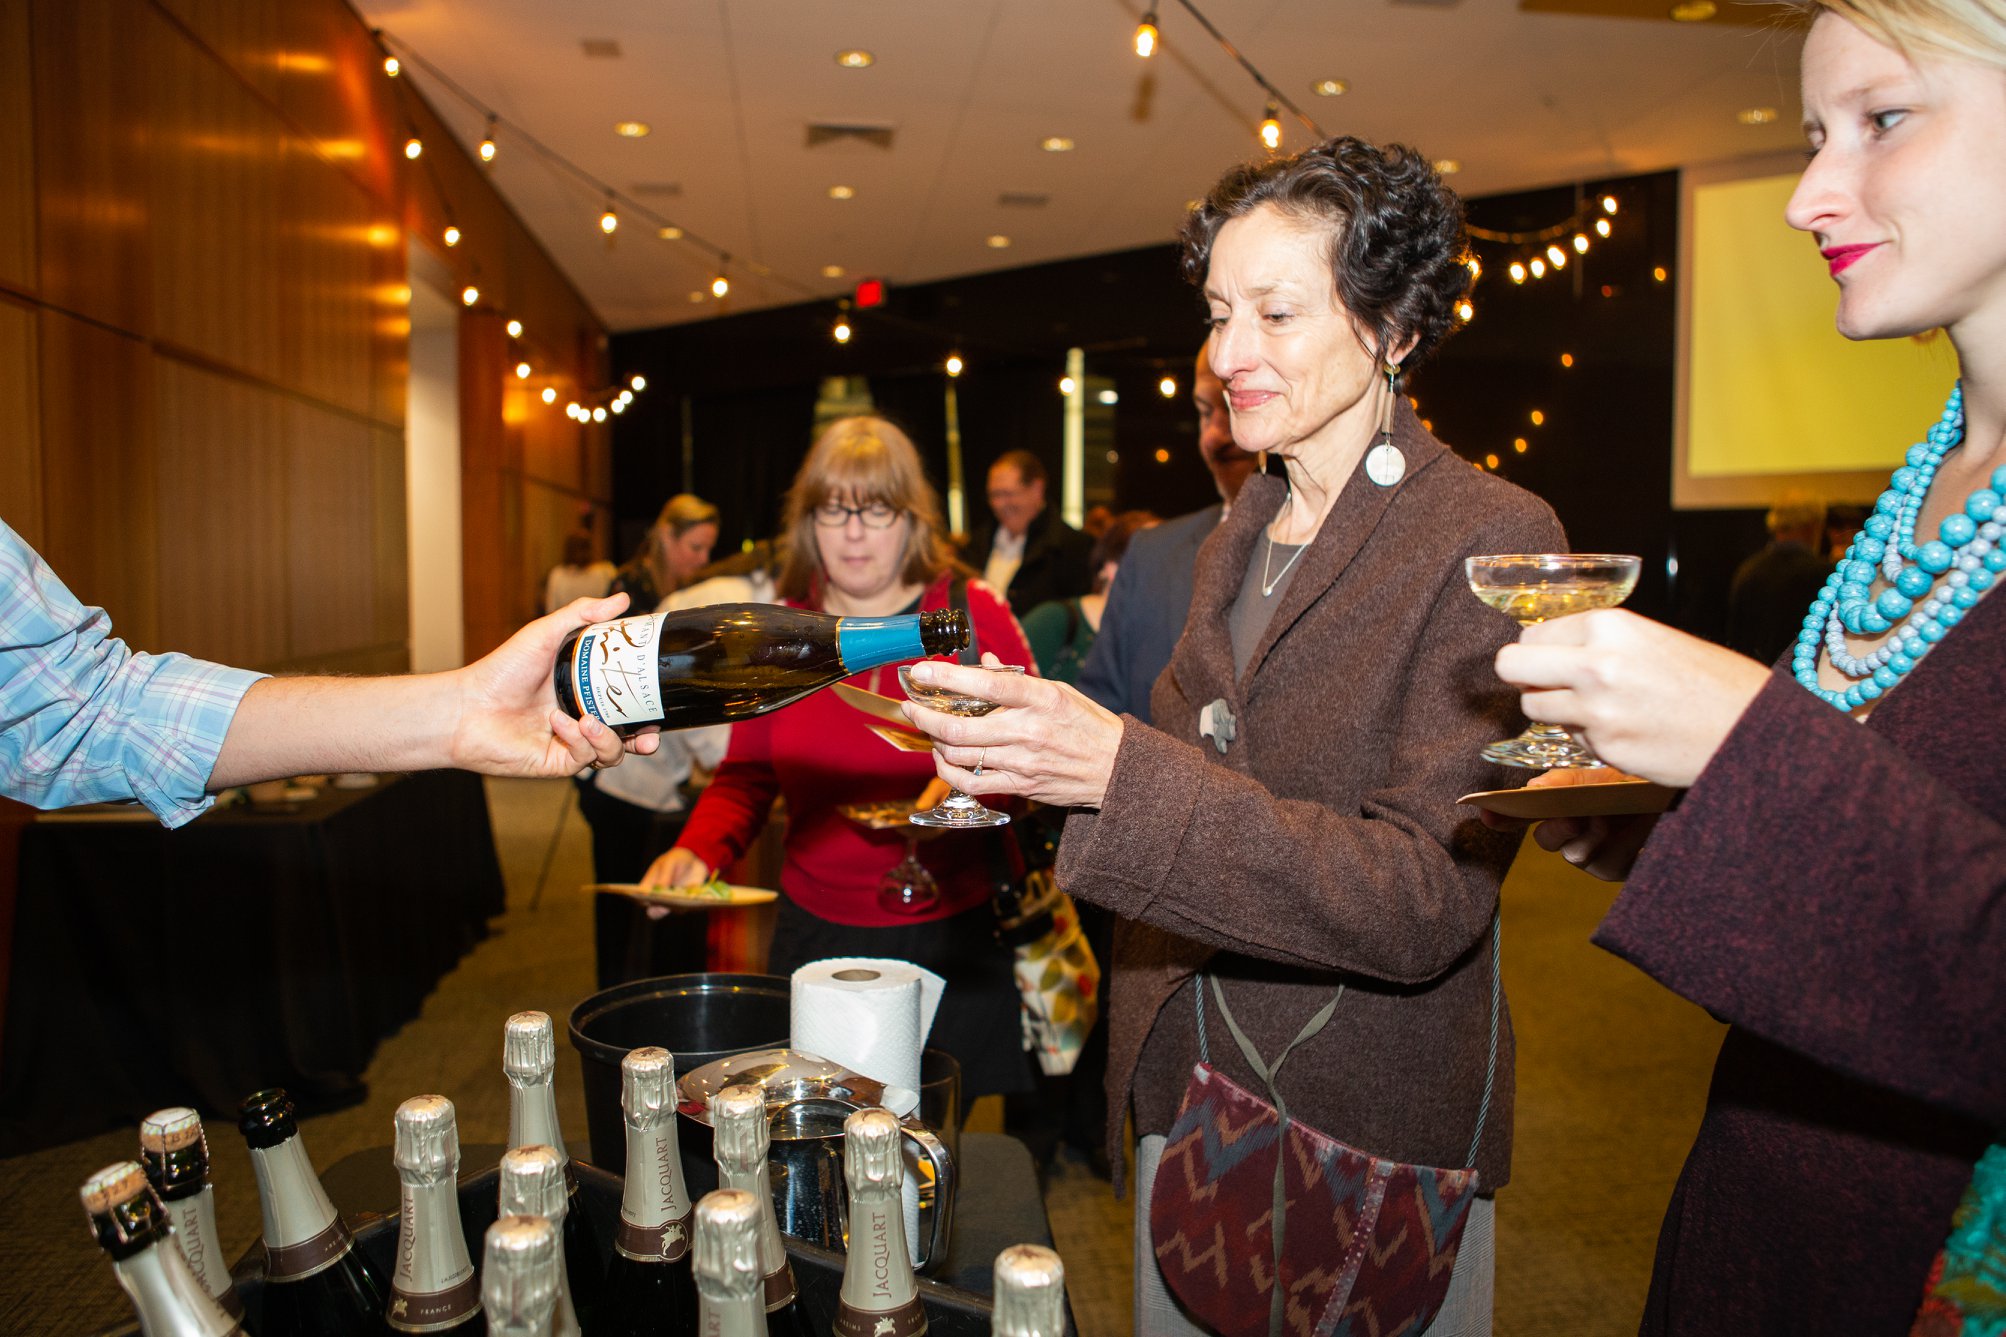 Modern photograph of a middle-aged white woman in a stylish brown blazer holding a champagne coupe glass up for someone out of the frame who is pouring champagne from a bottle into the glass. Several other women guests stand in line waiting for their turn.